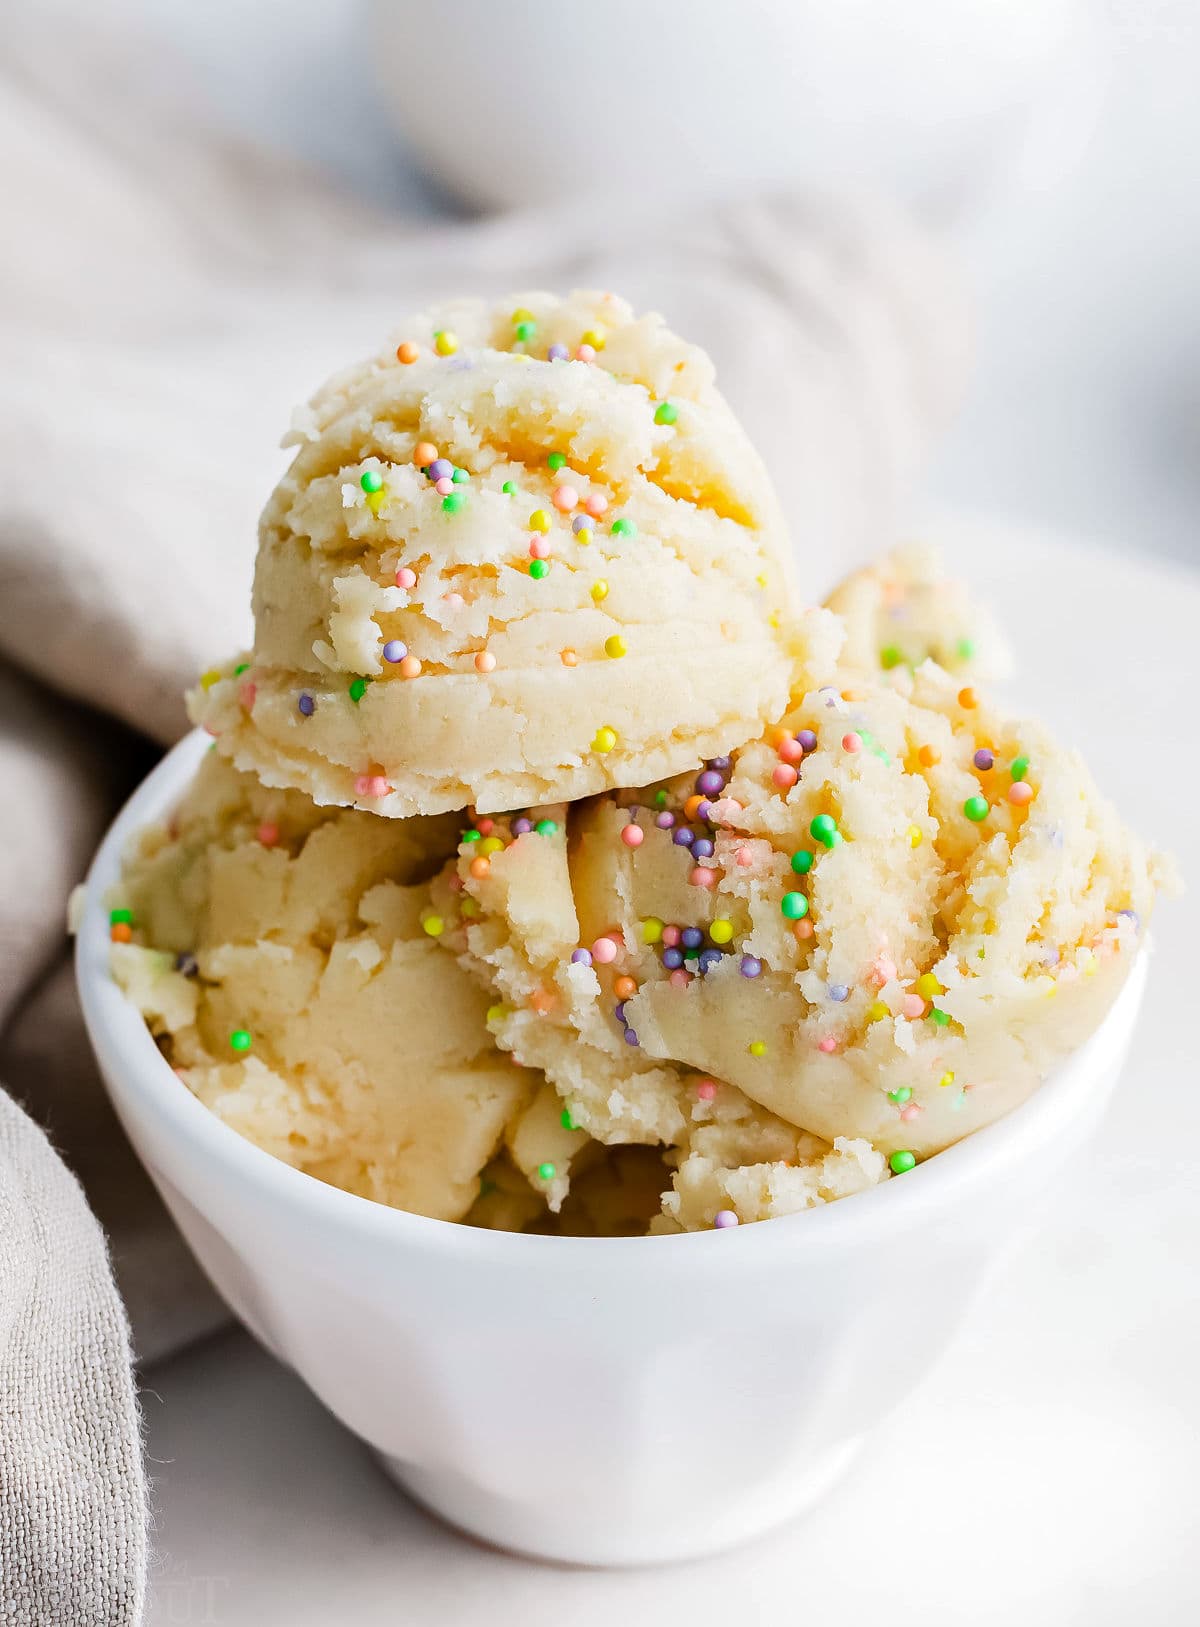 edible cookie dough with sprinkles in white bowl.